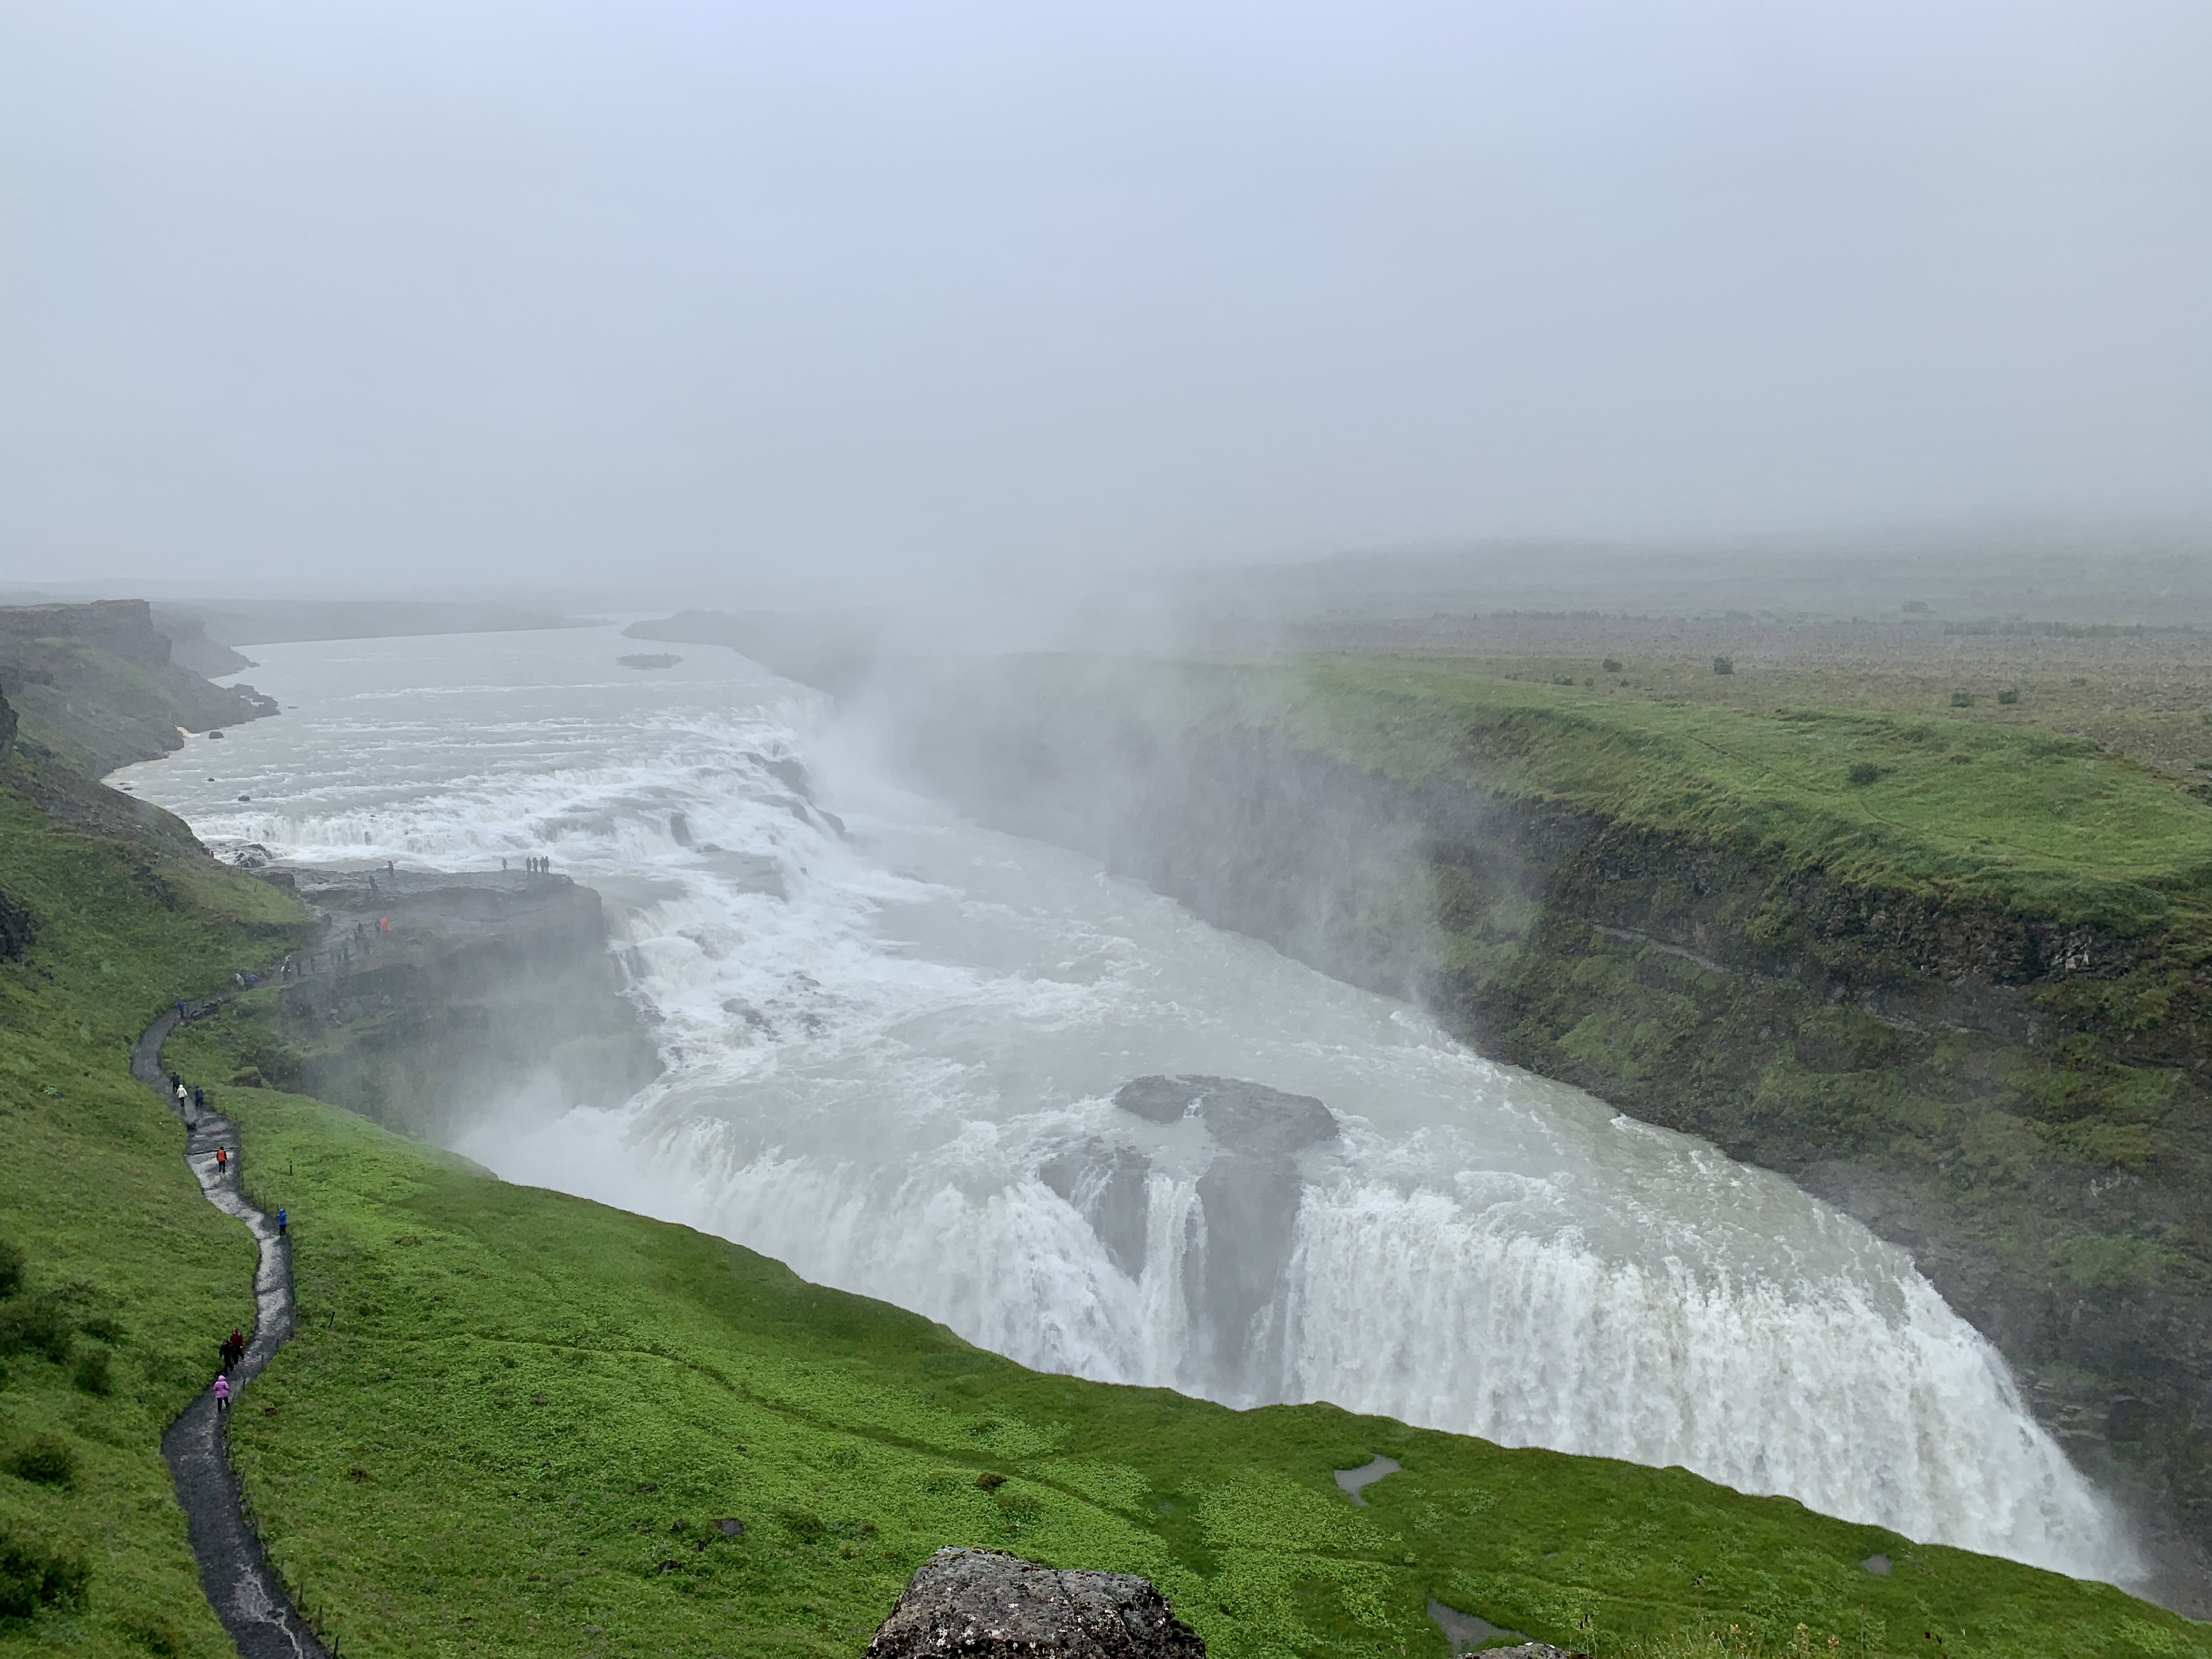 View of Gullfoss Waterfall in Iceland from viewing platform above